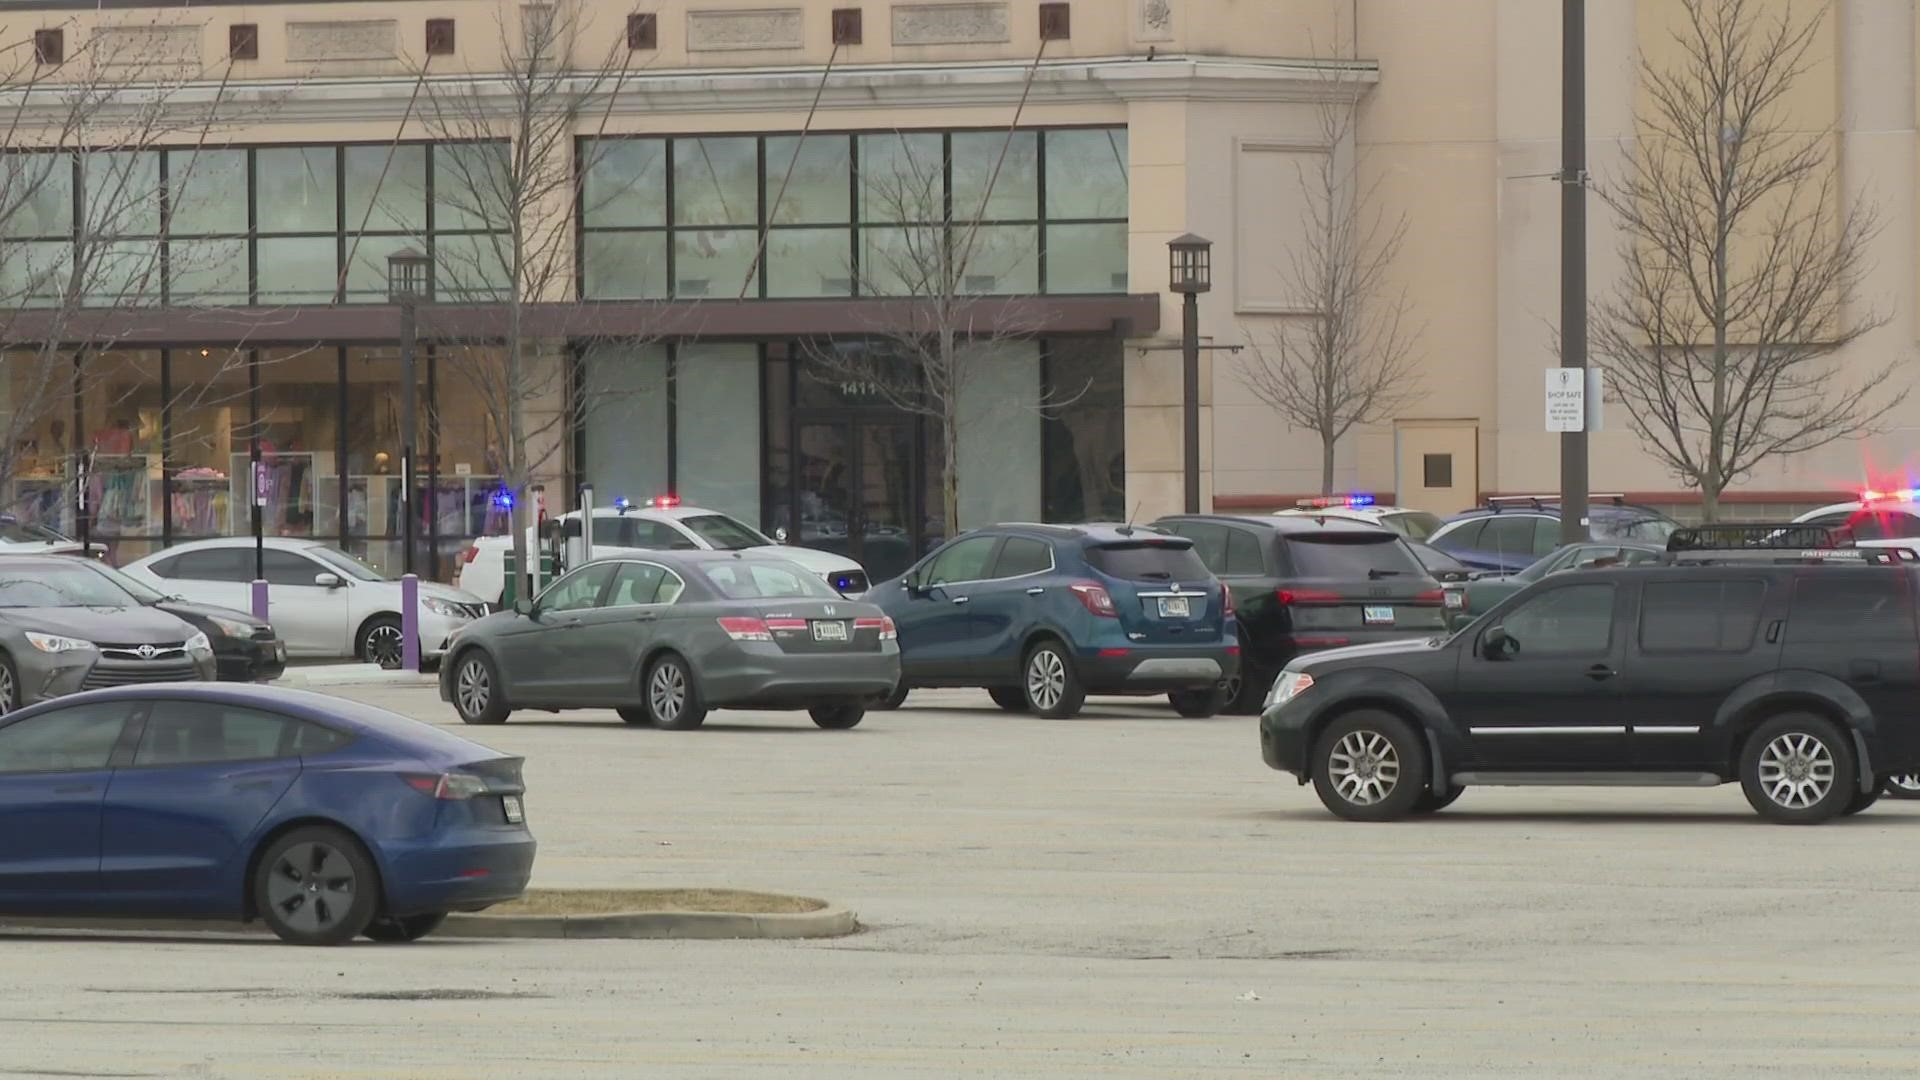 We've learned police arrested another person for bringing a gun to Castleton Square Mall this past weekend.